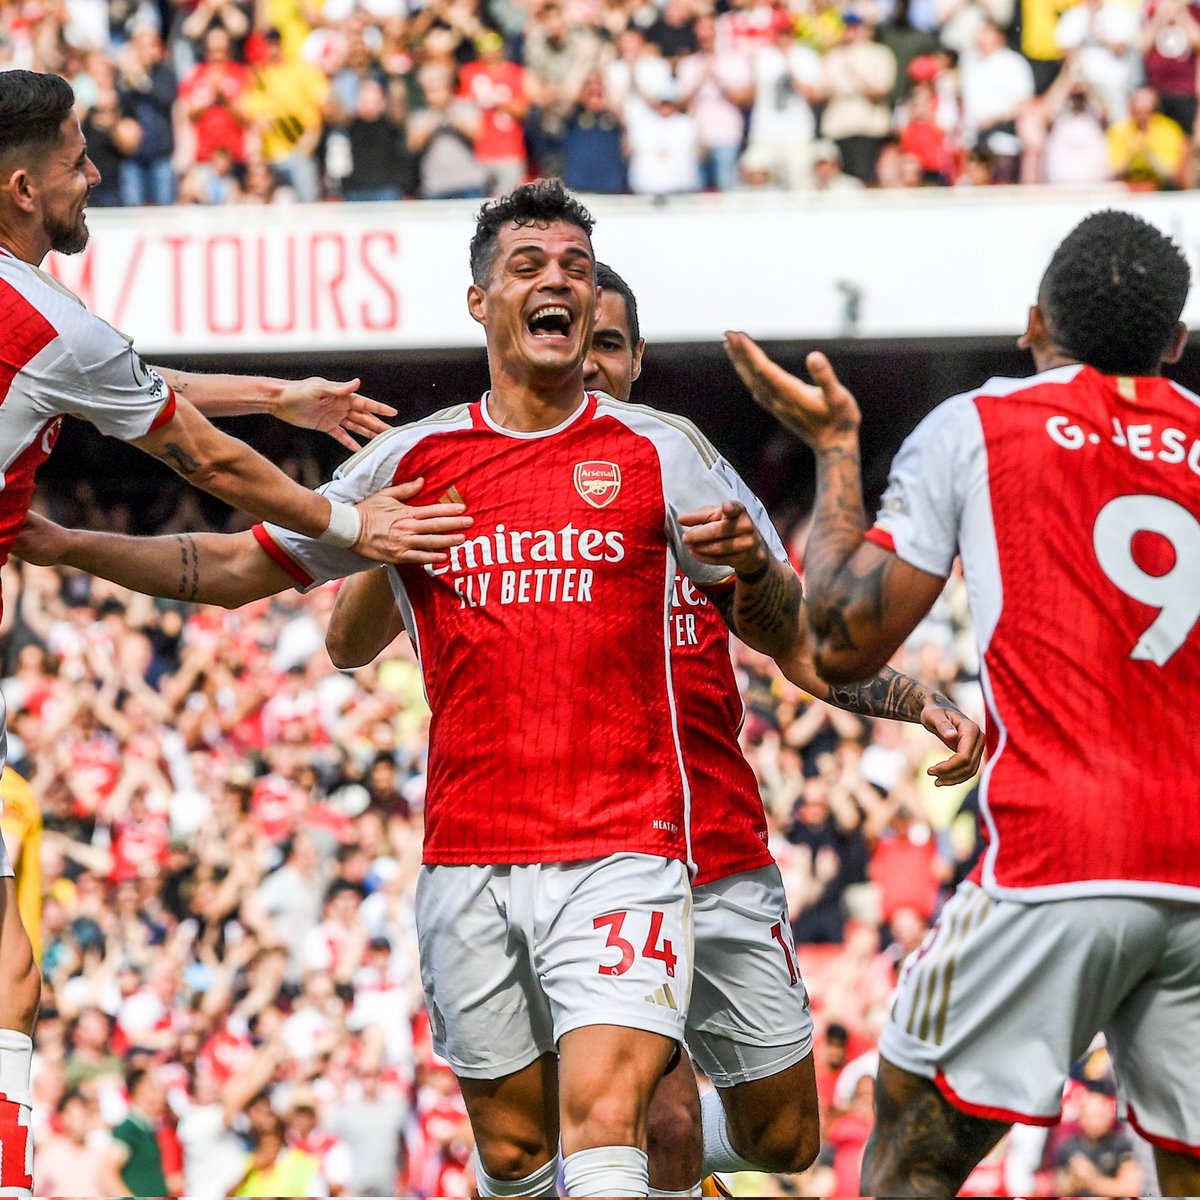 Granit Xhaka's is probably the biggest turnaround in football as we know it. From being booed after slamming the armband on the pitch to having the entire stadium applaud him while asking him to stay in what will probably be his last game in Arsenal after scoring a brace #ARSWOL